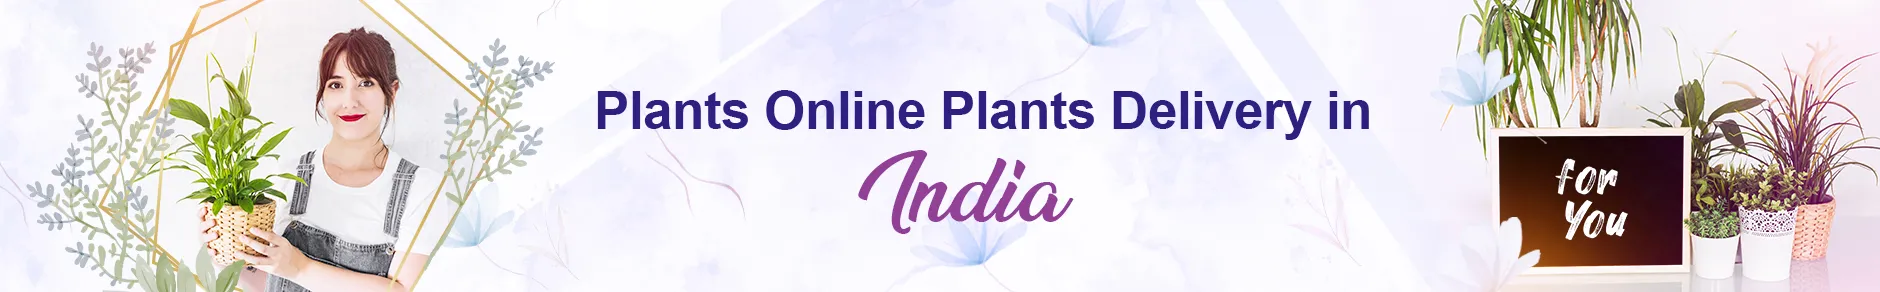 Plants - Online Plants Delivery in India